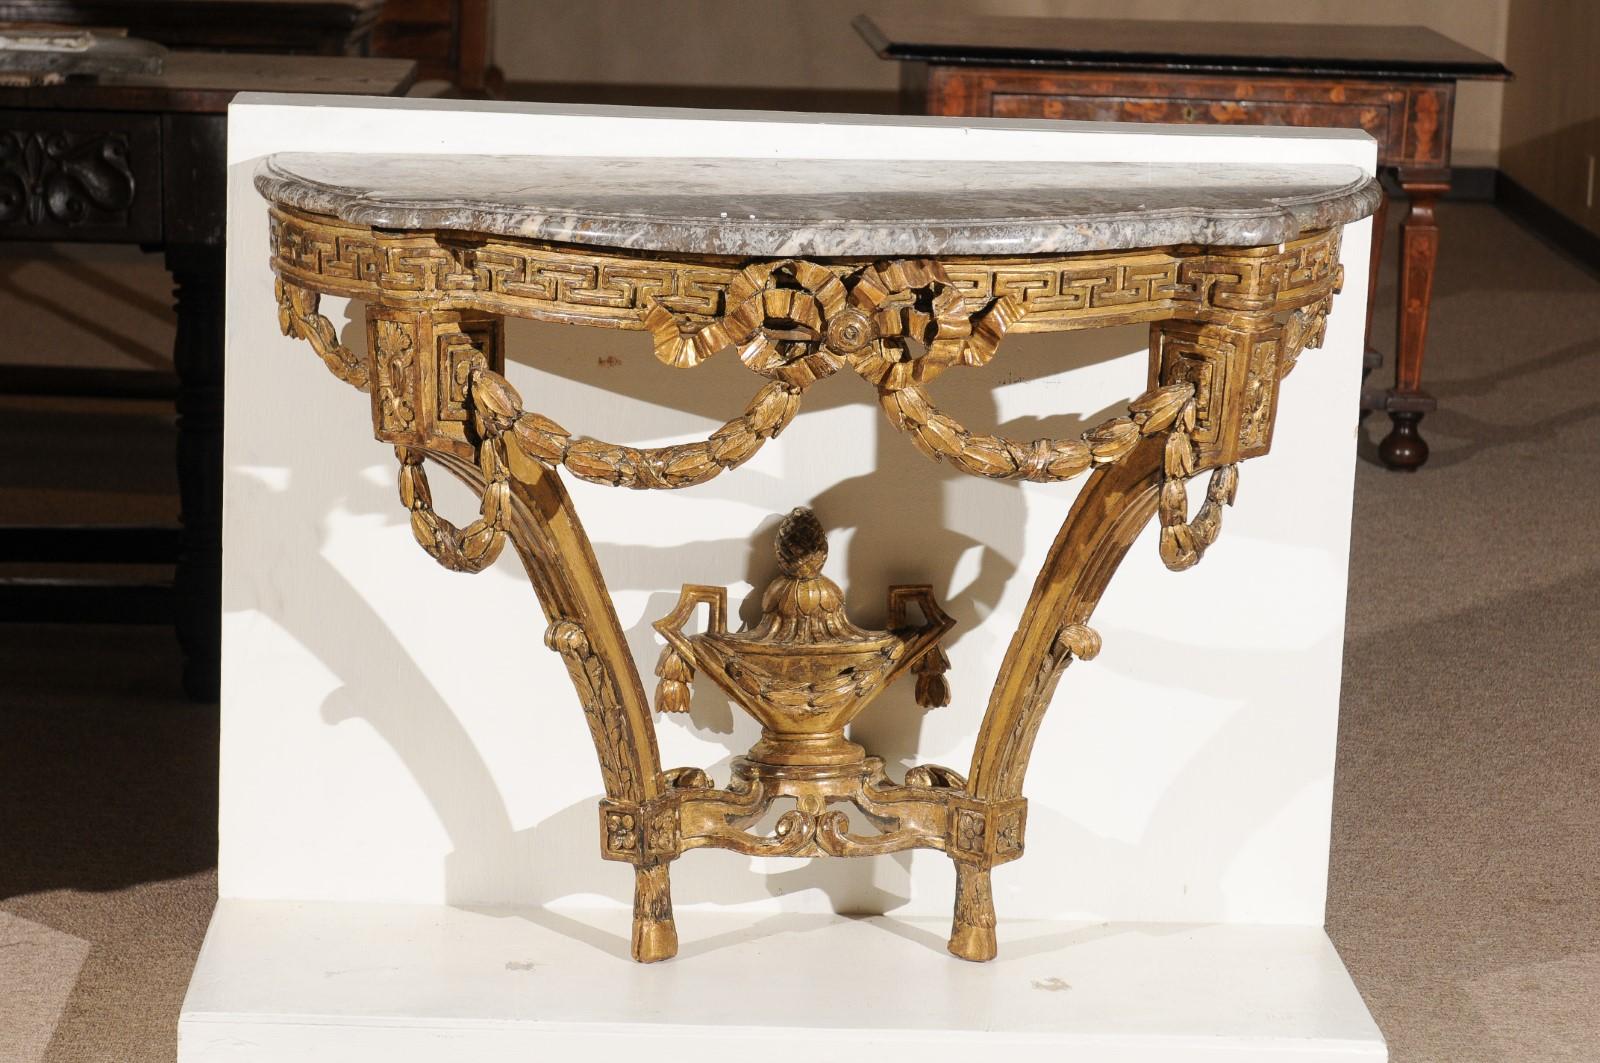 Transitional Louis XV/XVI giltwood wall-mounted console table with Greek key, swag, & urn detail, France, ca. 1770.
   